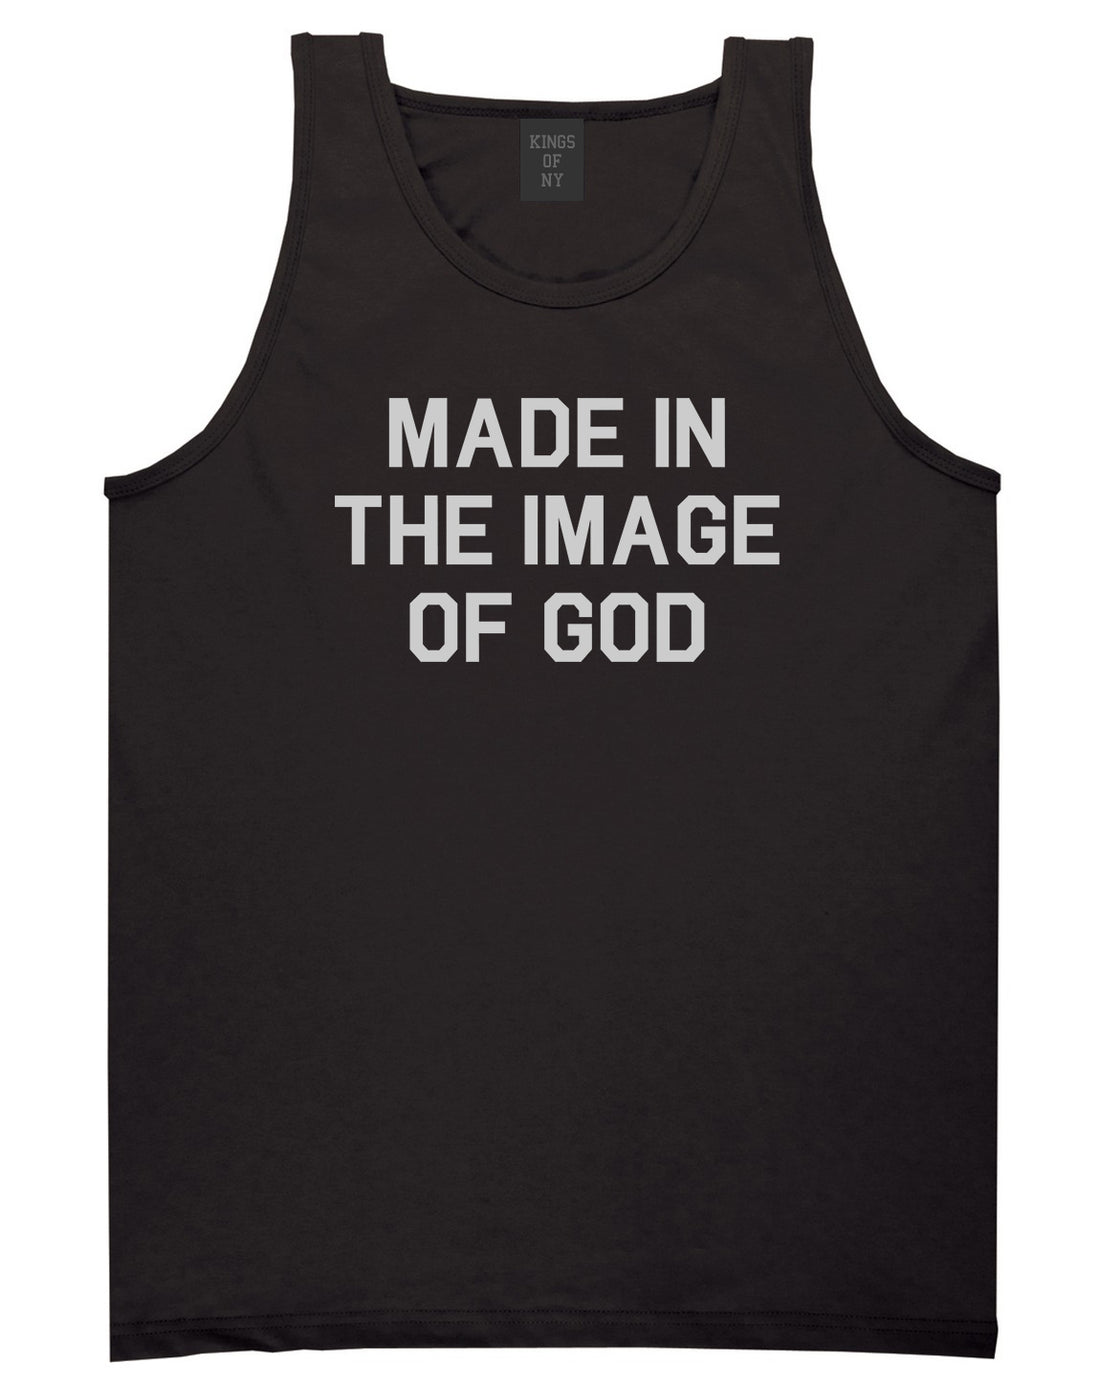 Made In The Image Of God Mens Tank Top Shirt Black by Kings Of NY